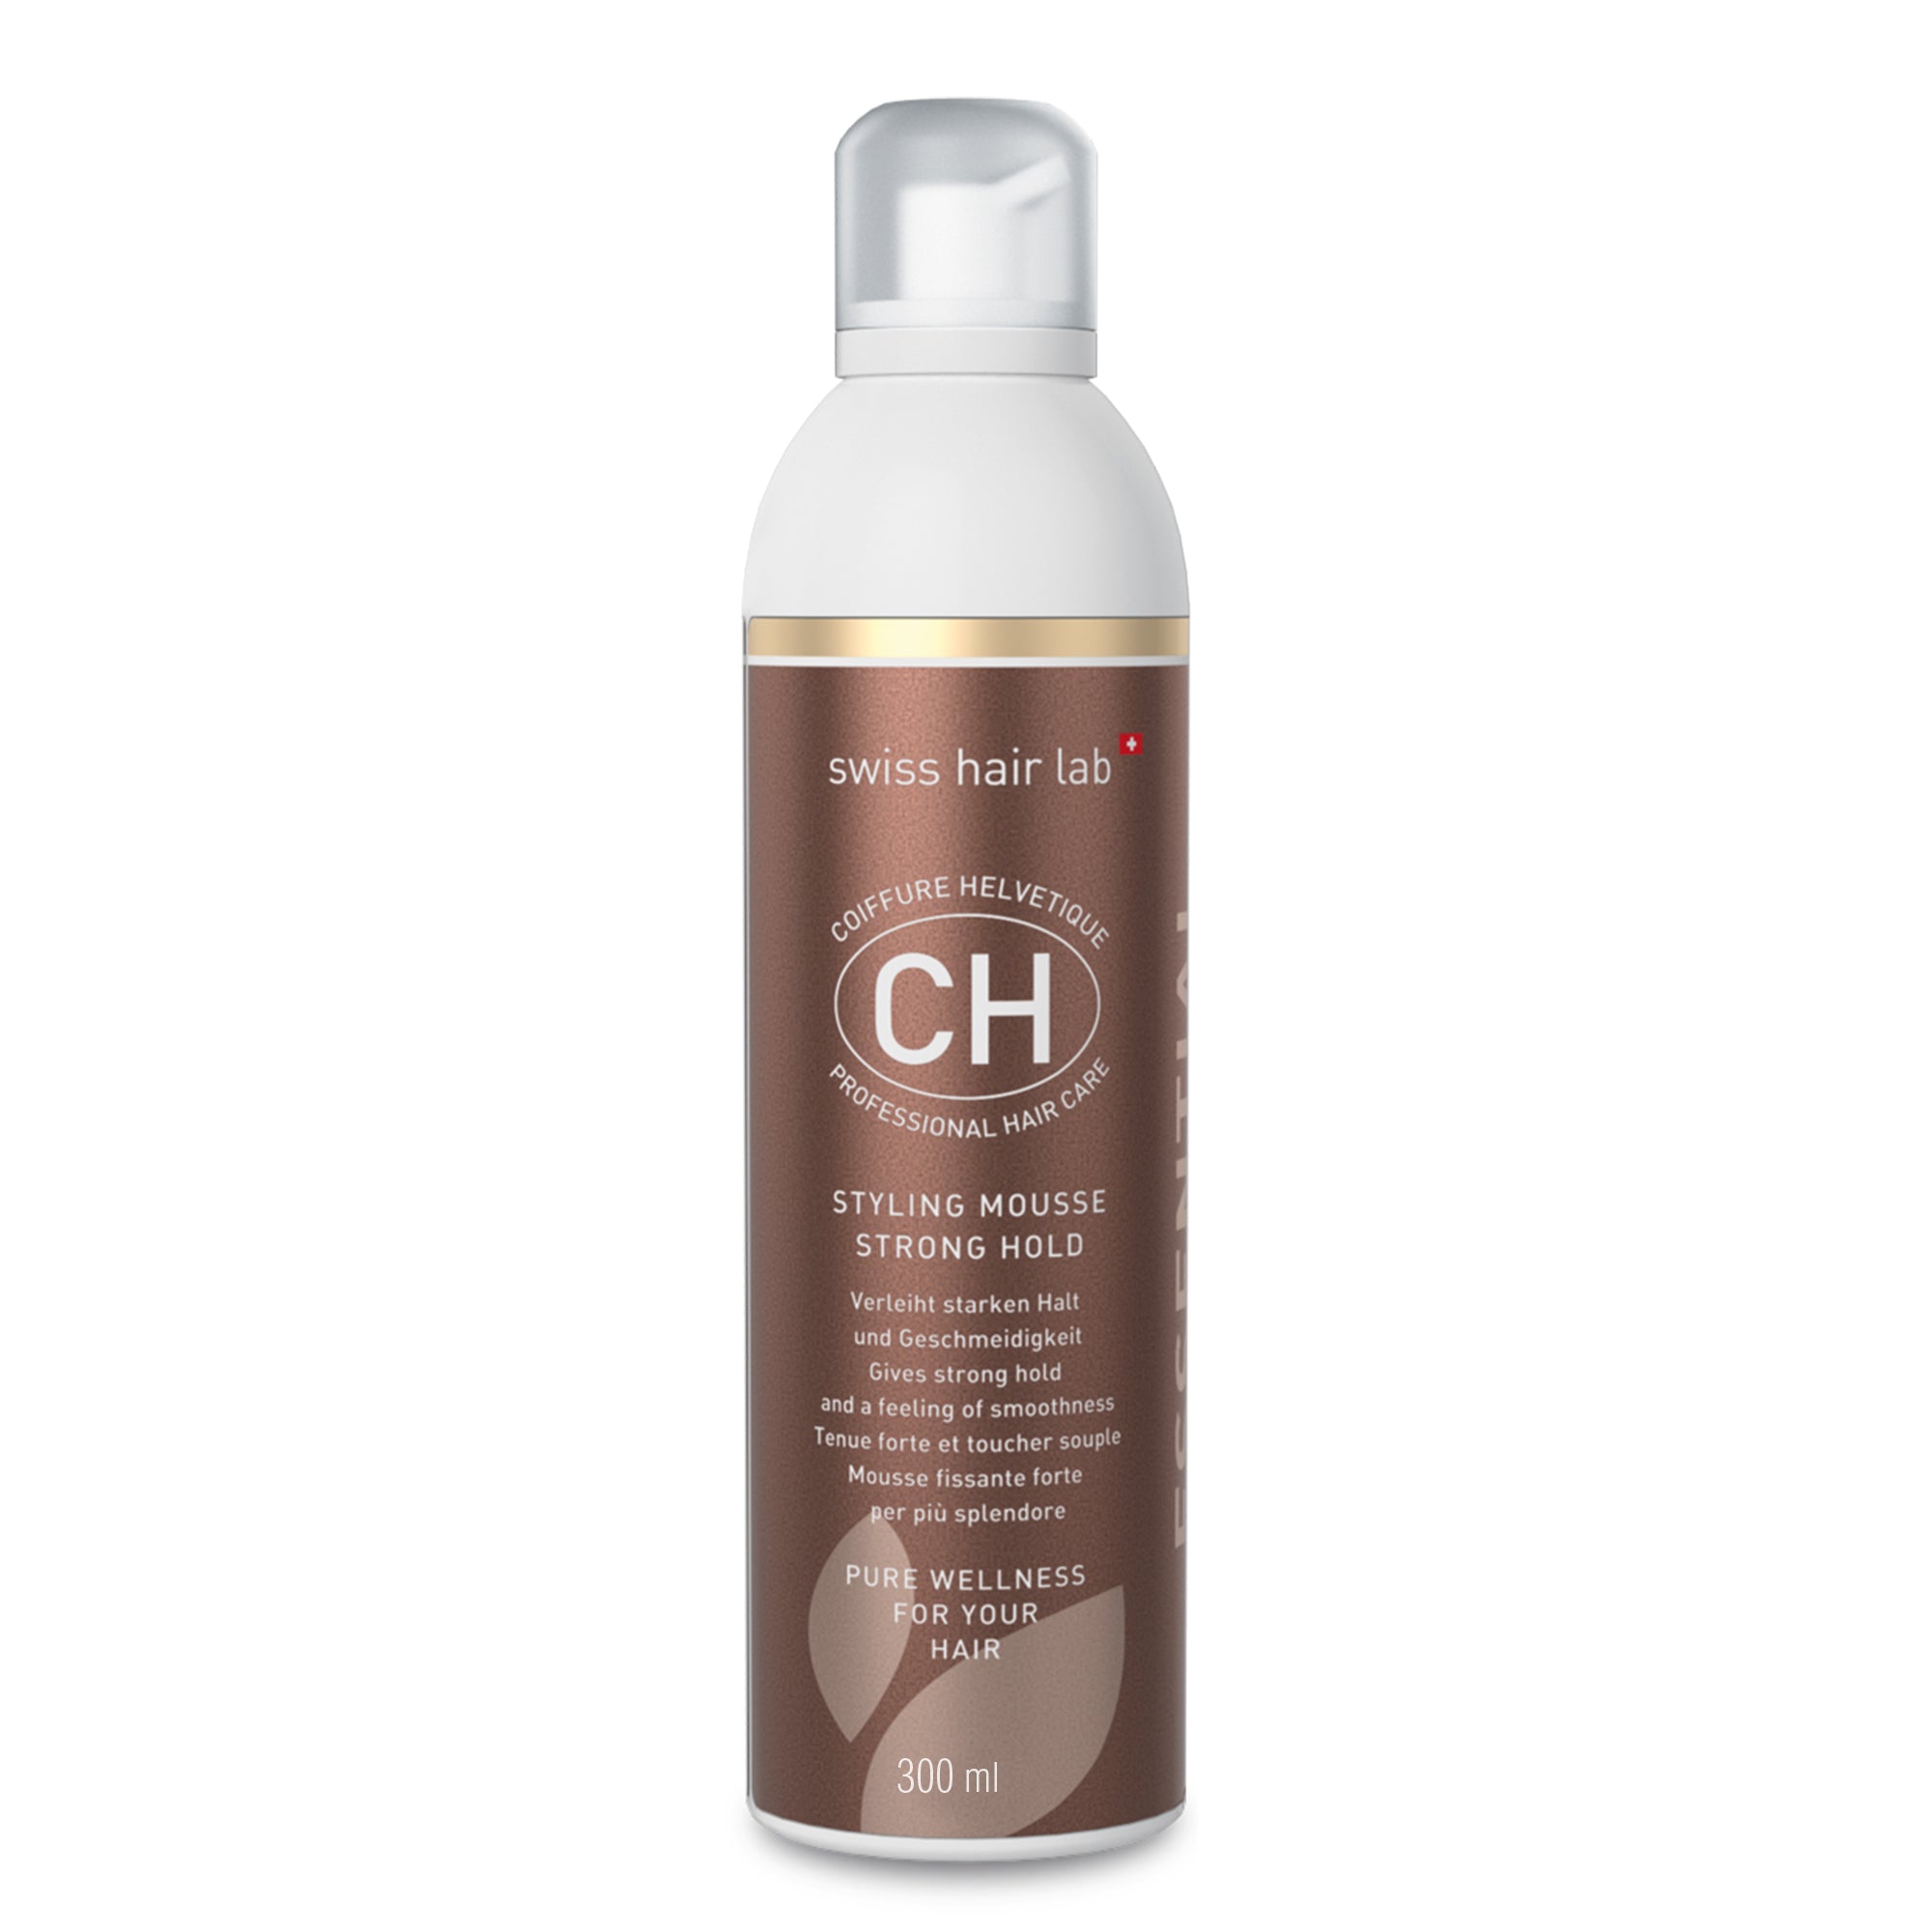 STYLING MOUSSE STRONG HOLD 300 ml